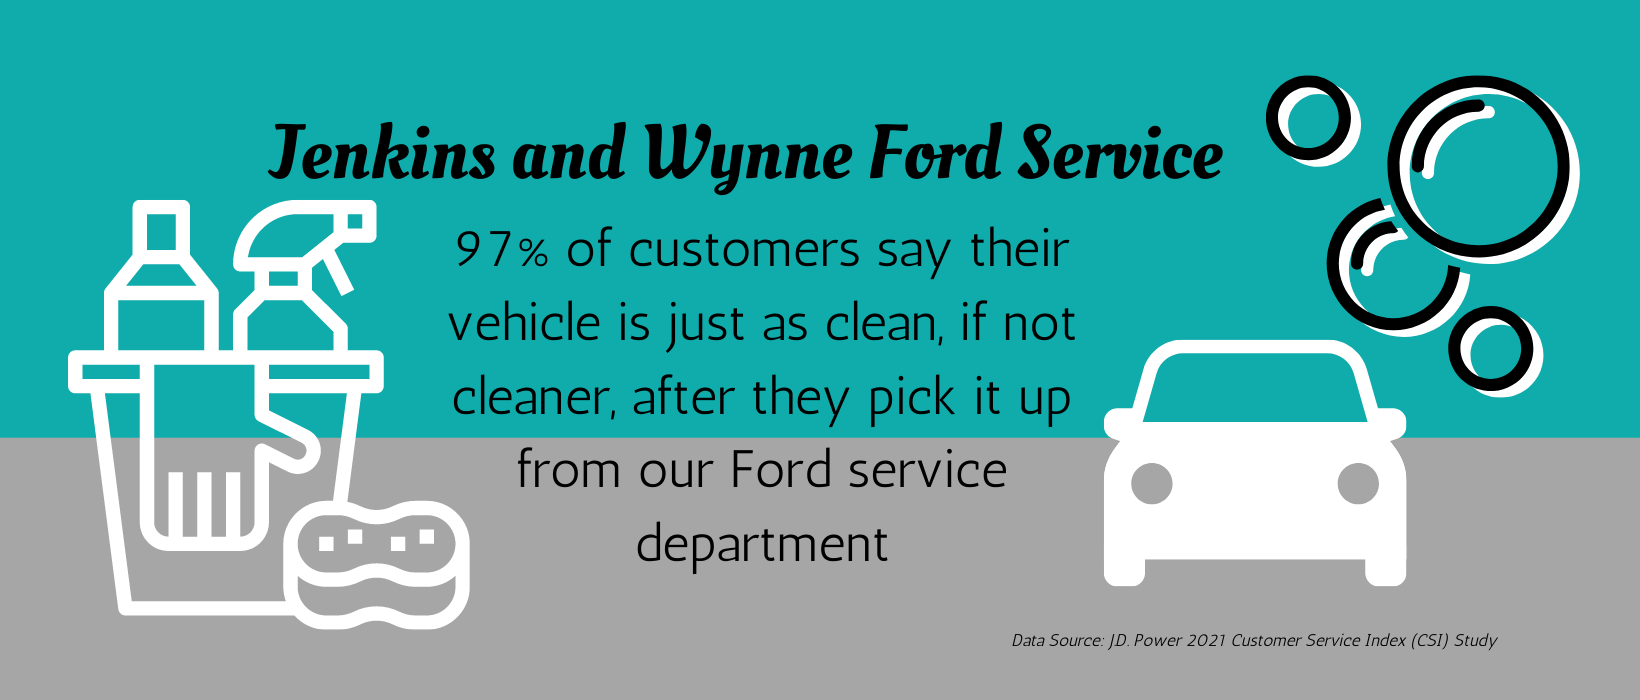 Clean-Ford-Service-Facebook-Cover-1640-x-700-px